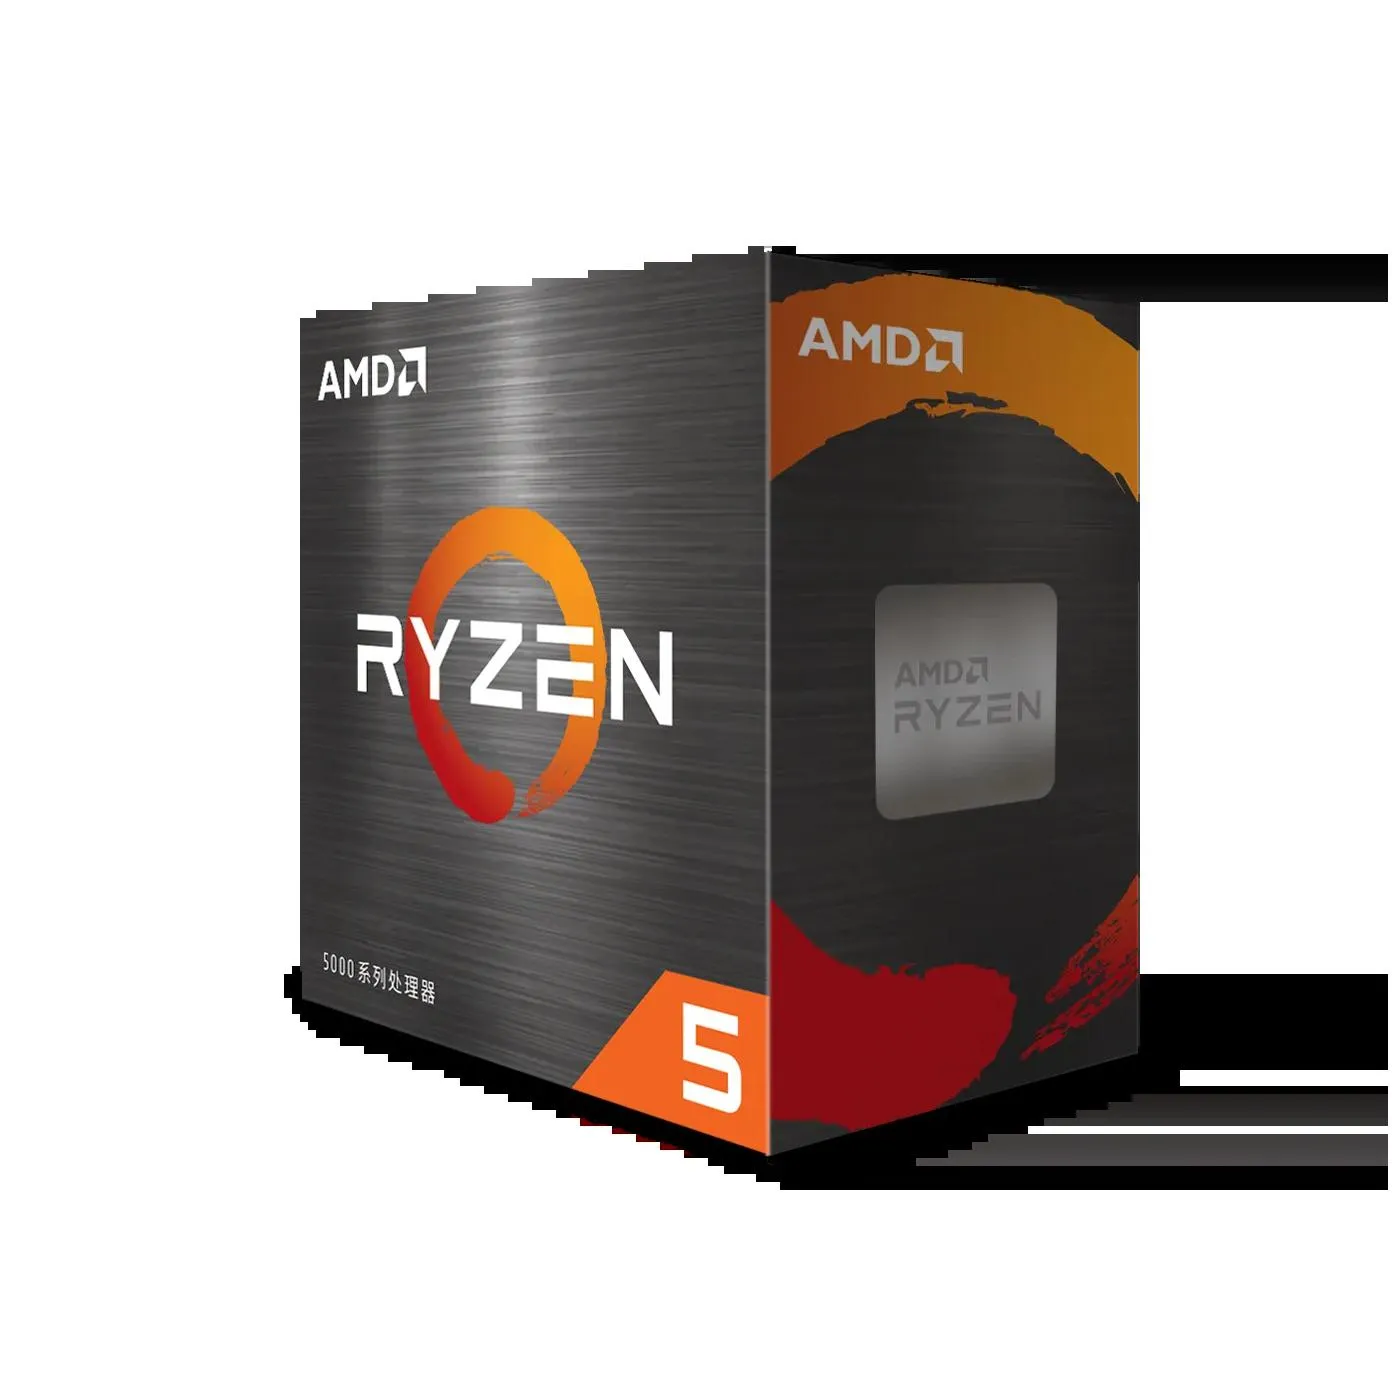 AMD Ryzen 5 5600 R5 5600 3.5 GHz 6-Core 12-Thread CPU Processor 7NM L3=32M 100-000000927 Socket AM4 Sealed and come with the fan